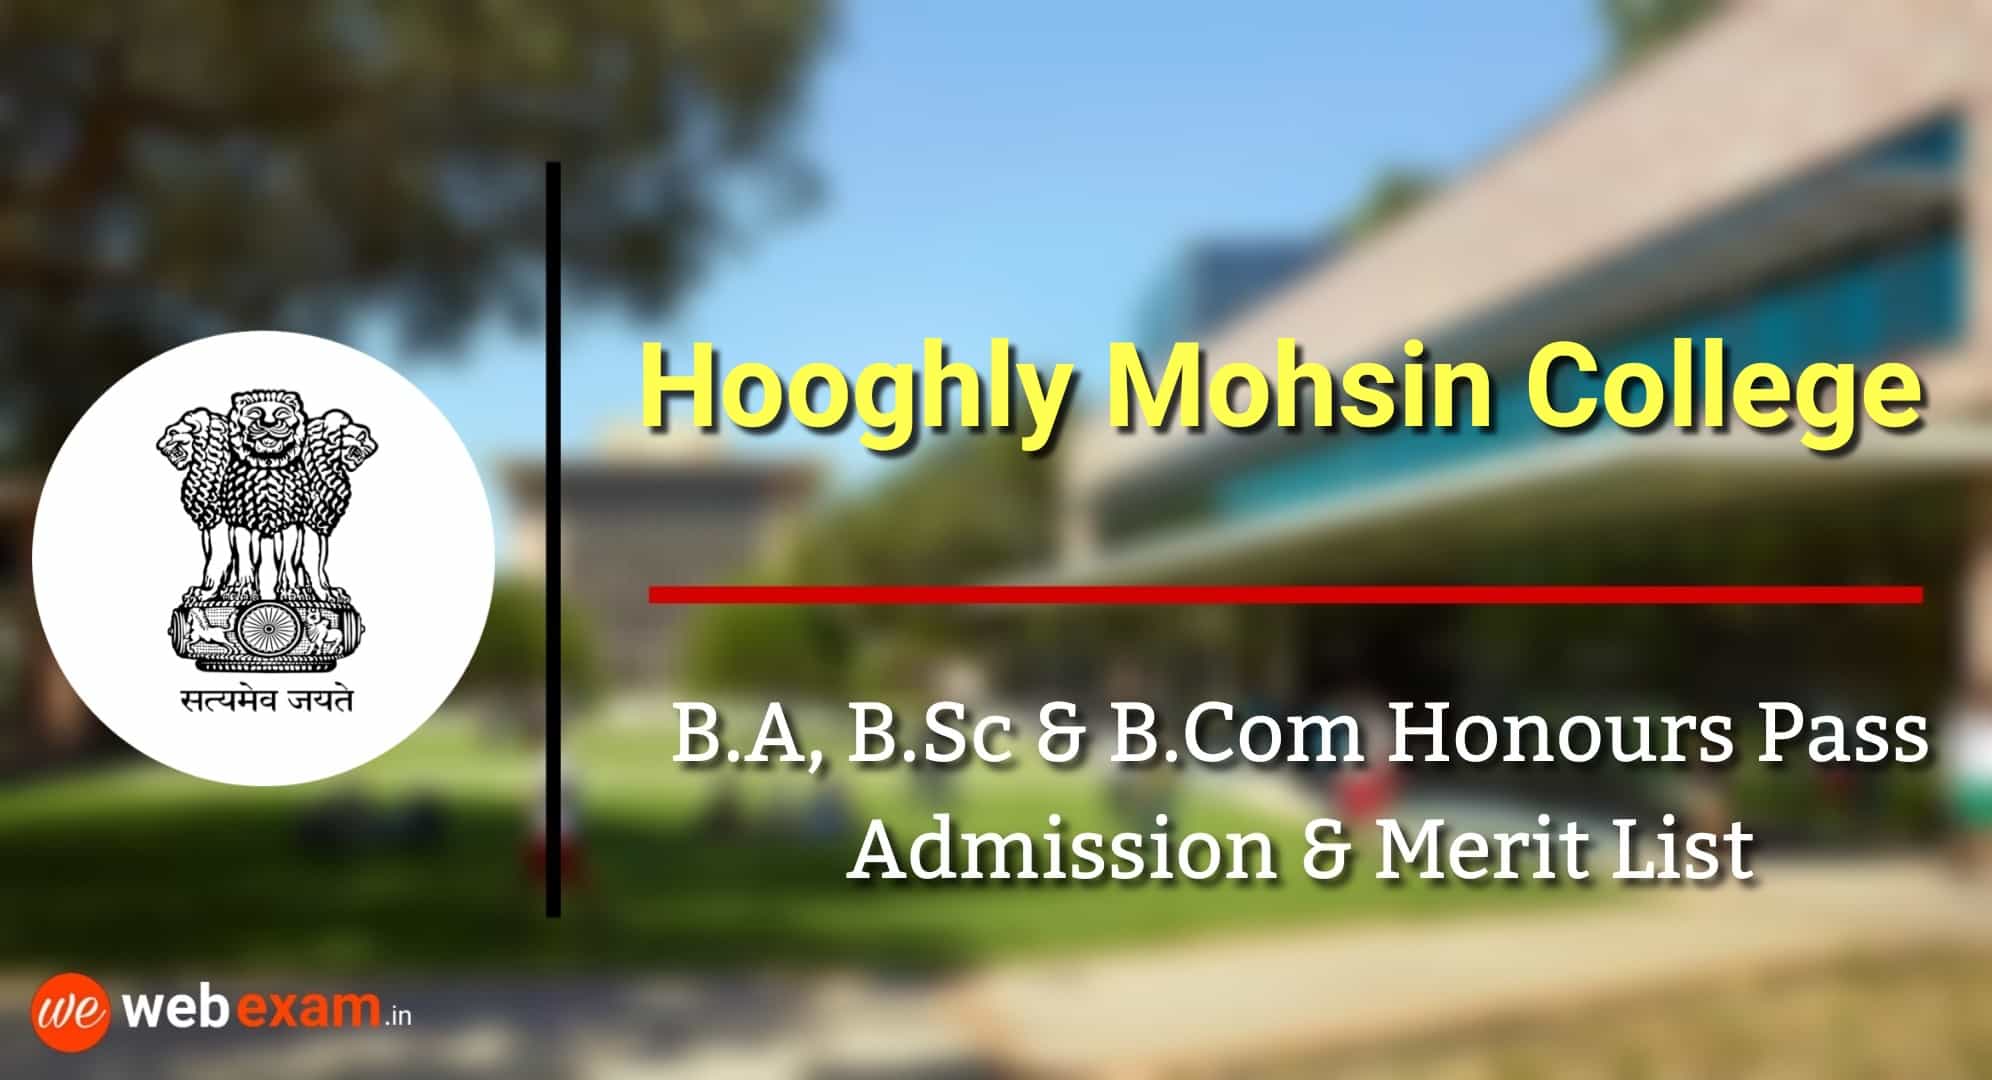 Hooghly Mohsin College Admission